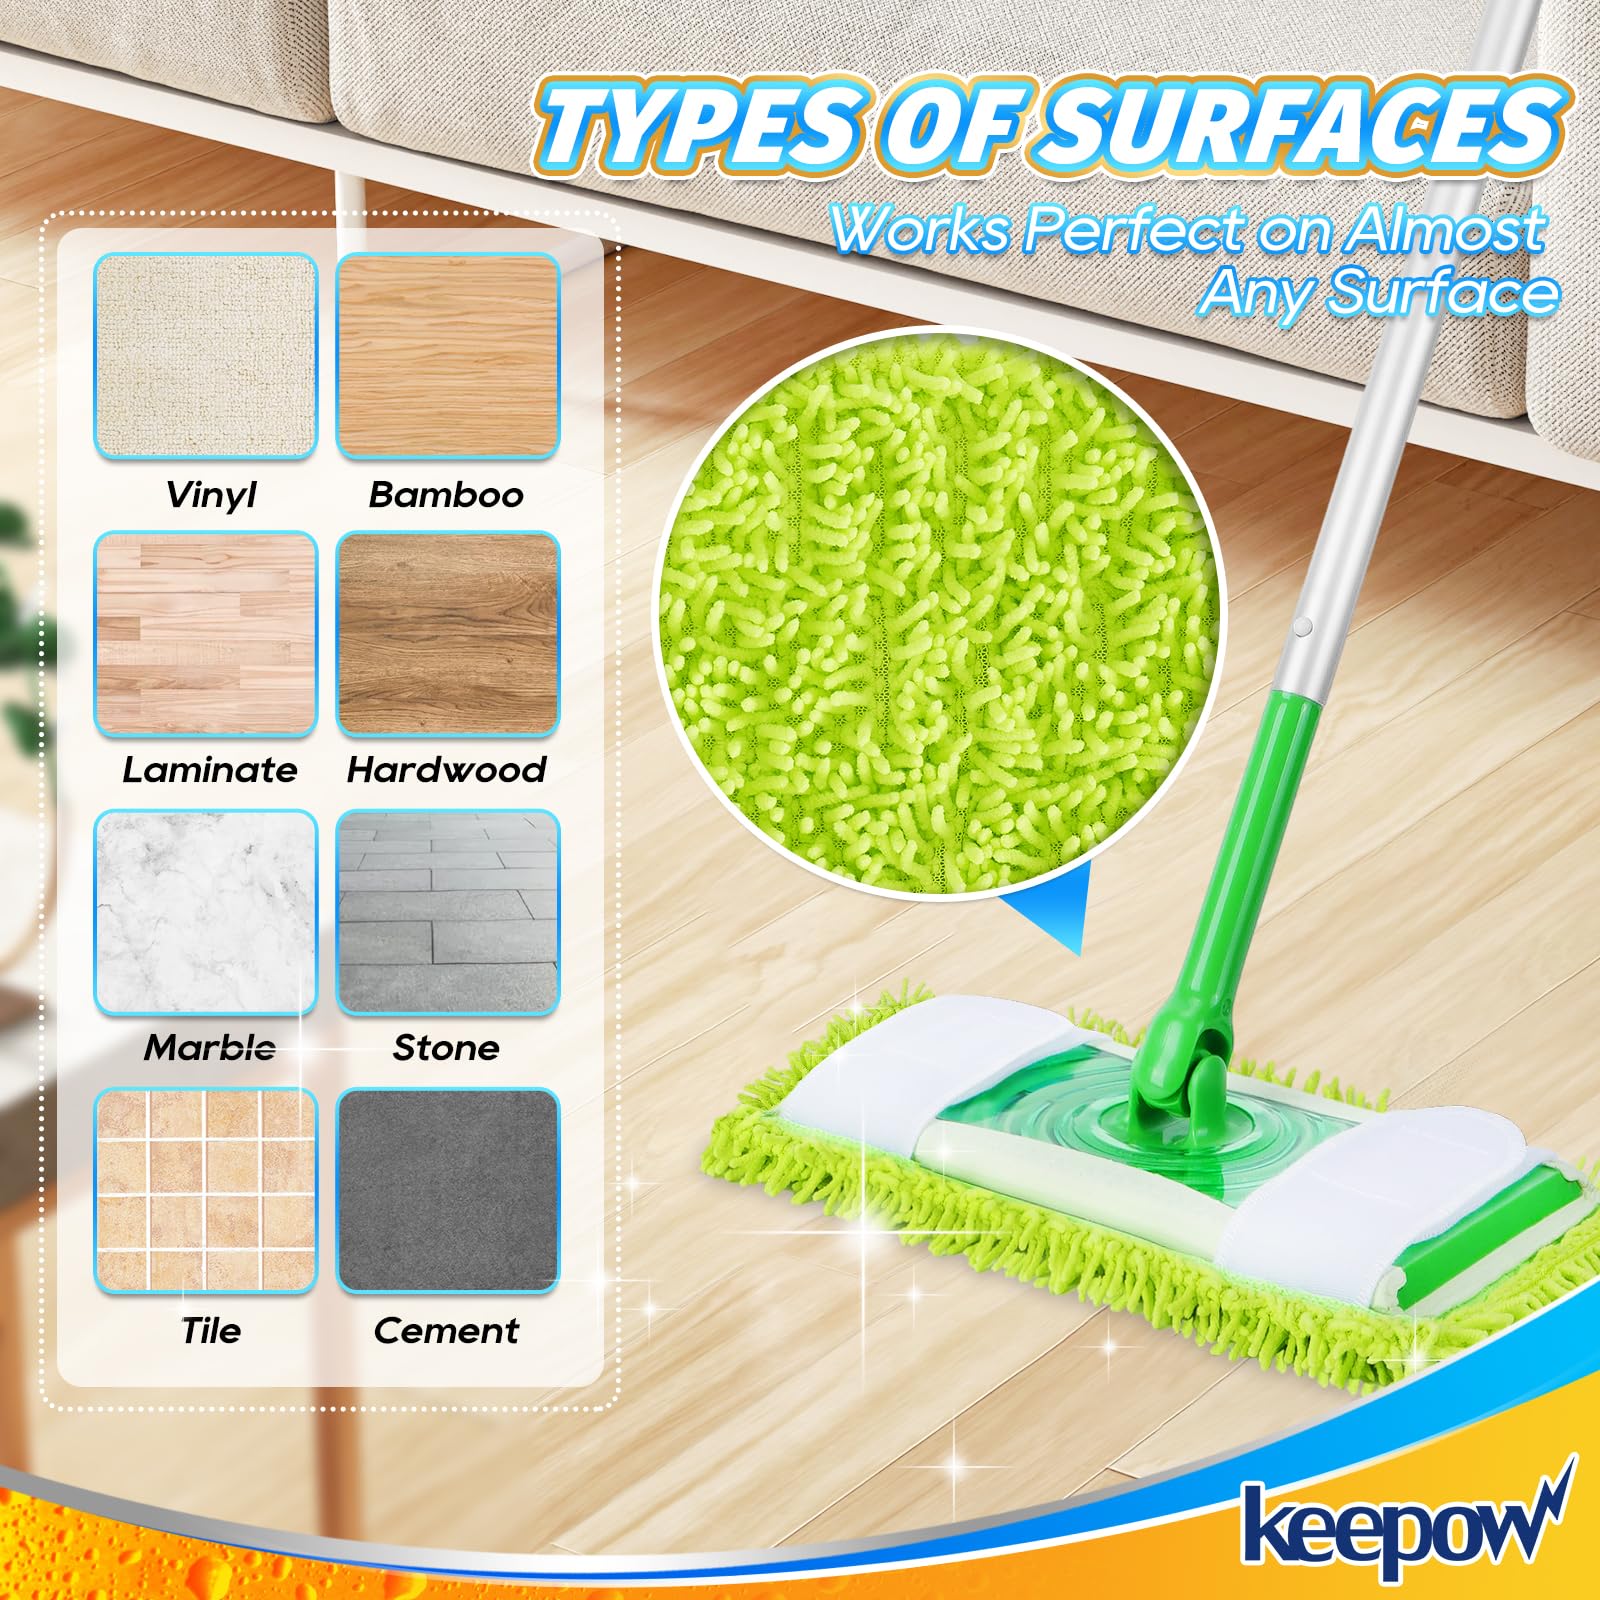 KEEPOW Reusable Microfiber Mop Pads Compatible with Swiffer Sweeper Mop, Washable Wet Mop Refills for Hardwood Floor Cleaning, 4 Pack (Mop is Not Included)